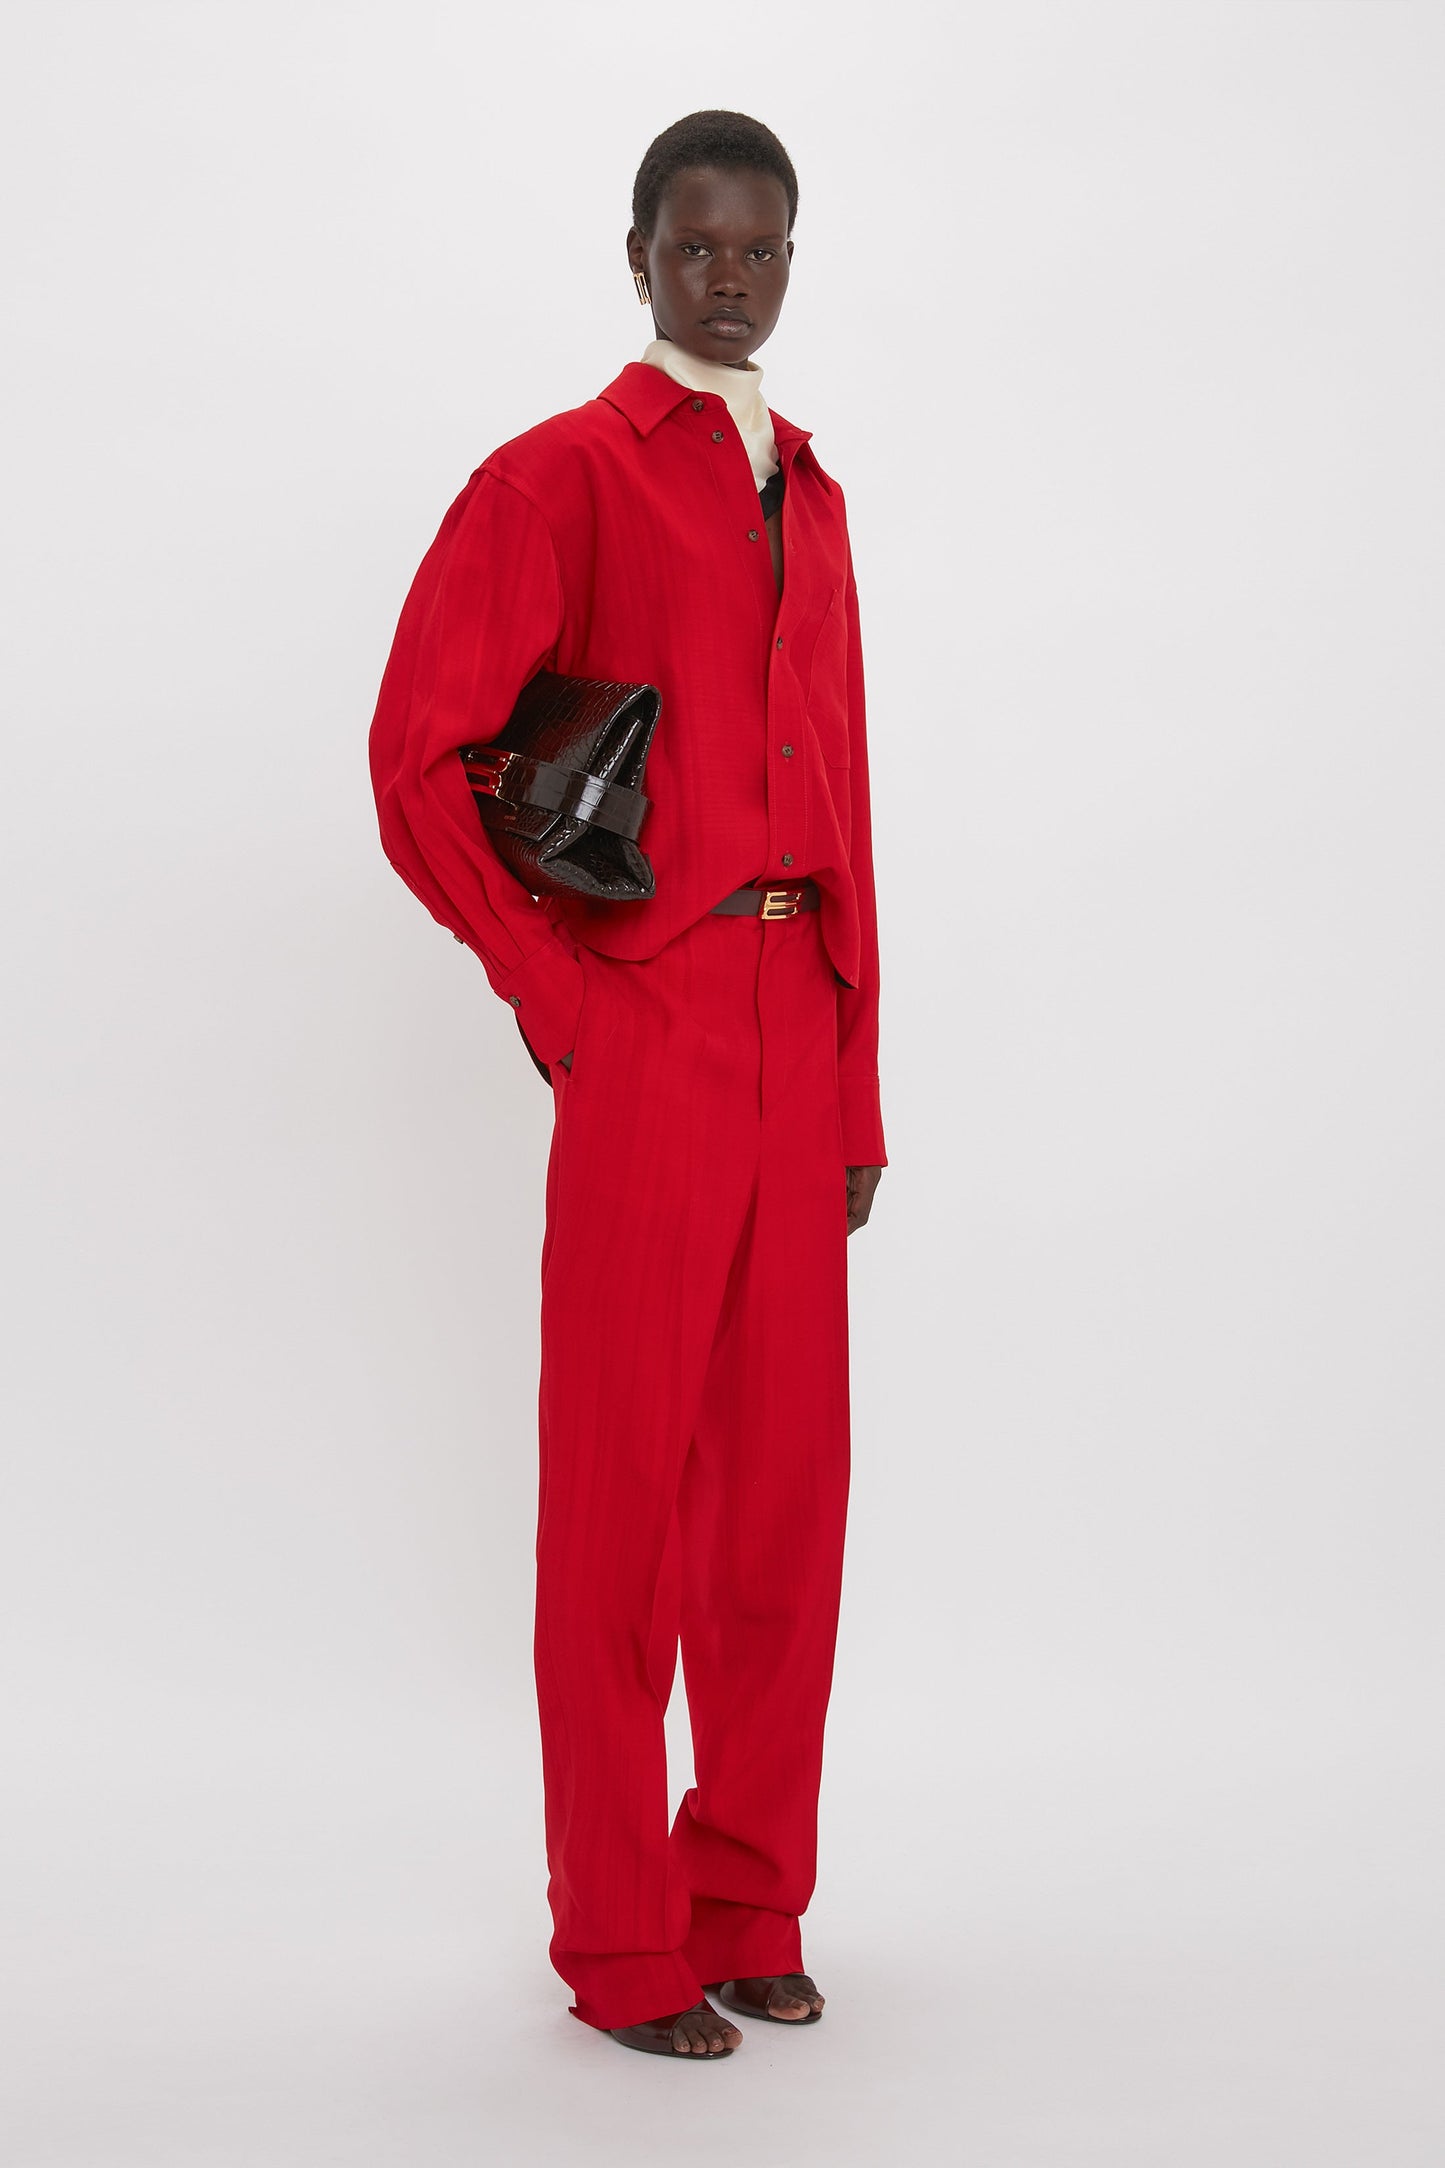 Person wearing a loose-fitting red shirt and pants, holding a Victoria Beckham B Pouch Bag In Croc Effect Espresso Leather, and standing against a plain white background.